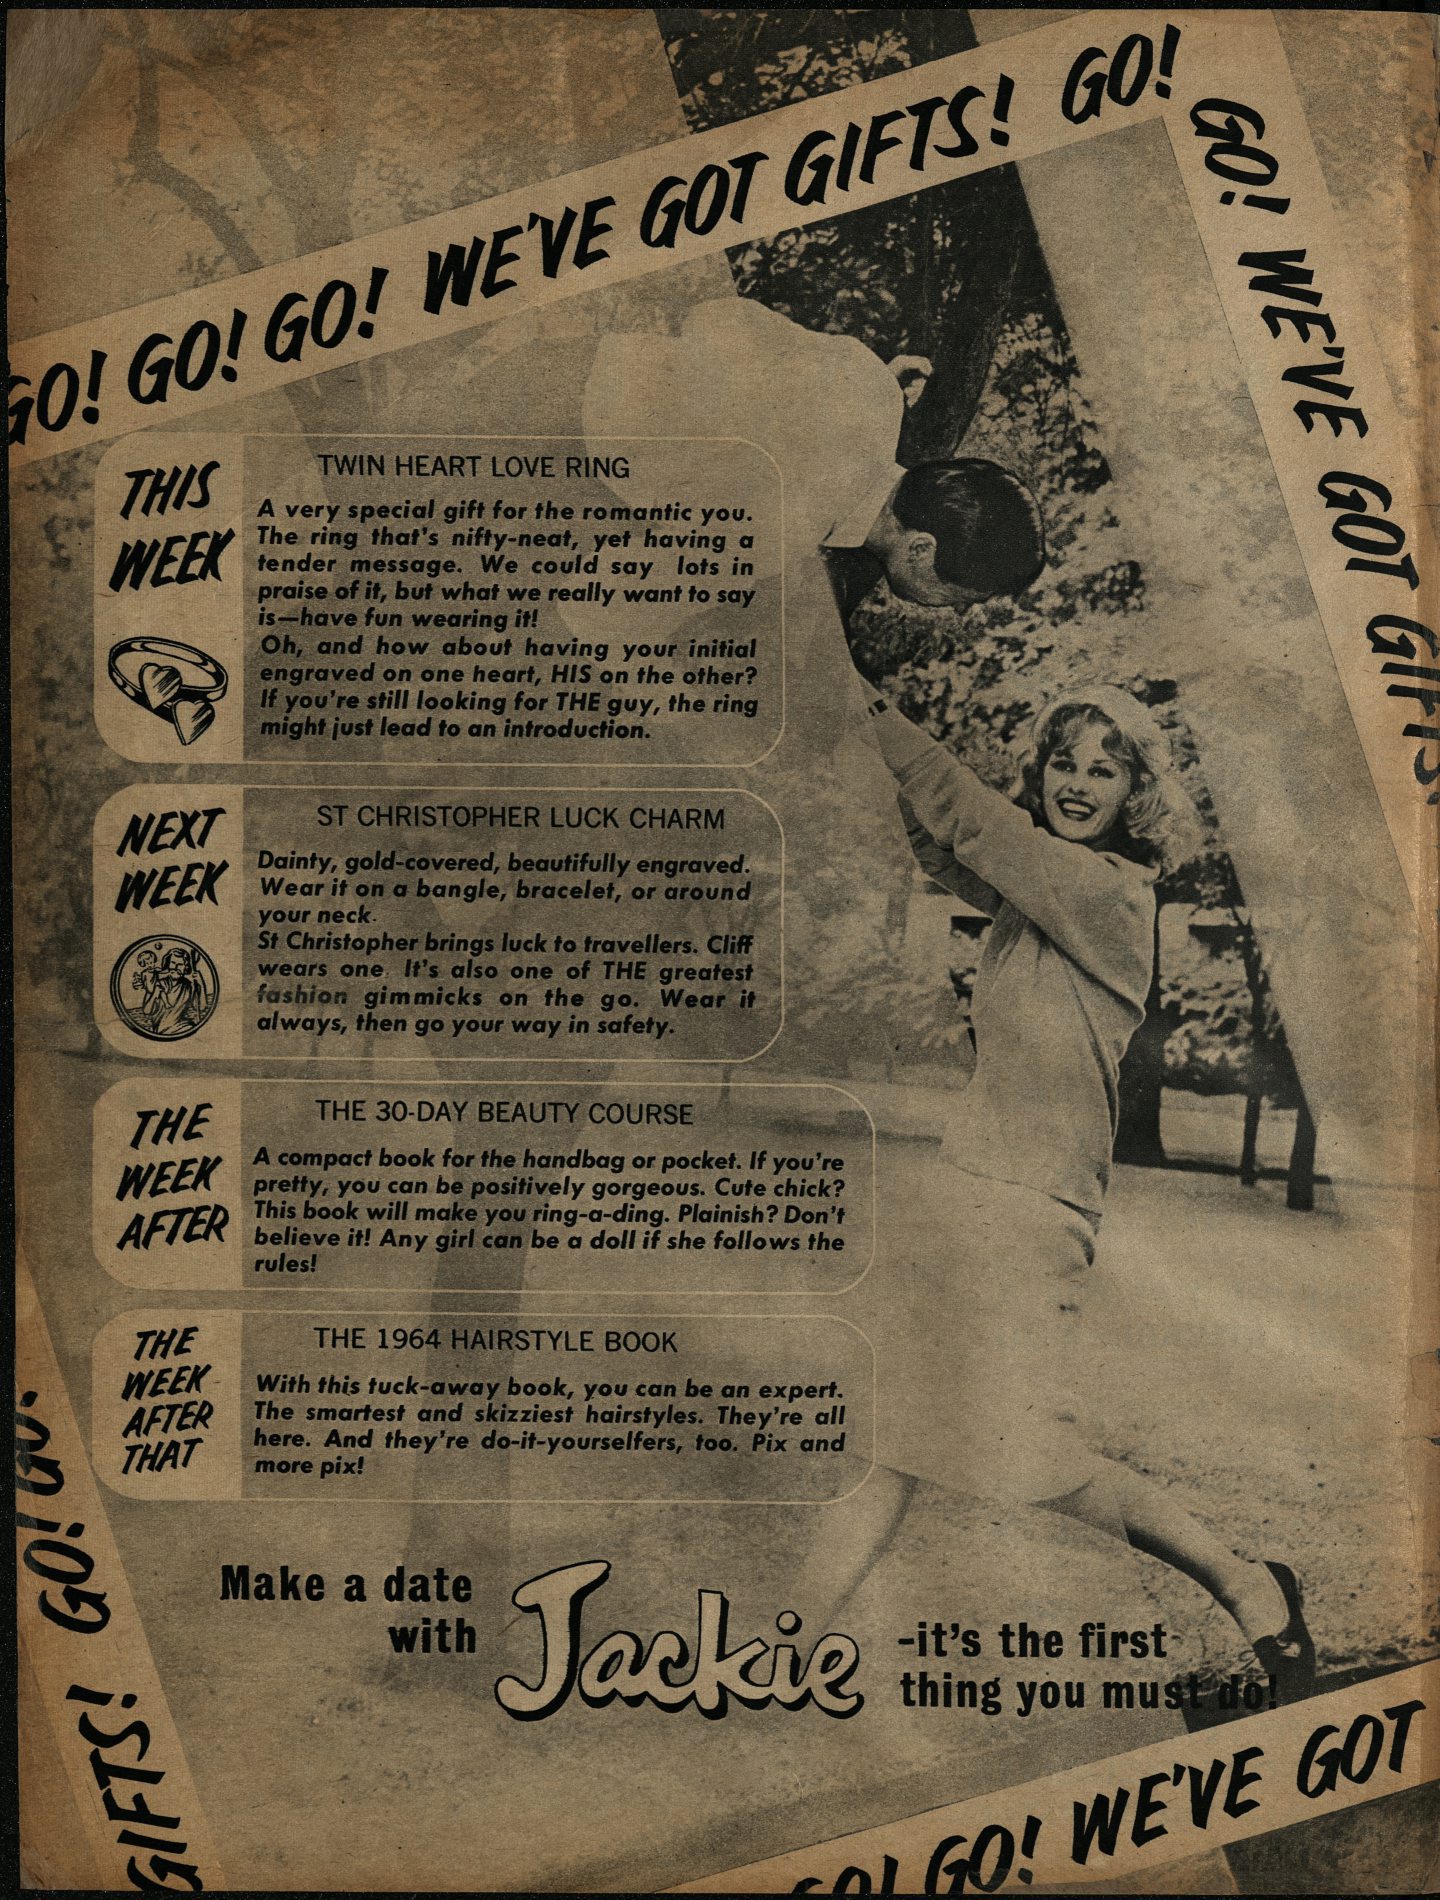 An inside page from the magazine outlining what was in the edition and the forthcoming edition